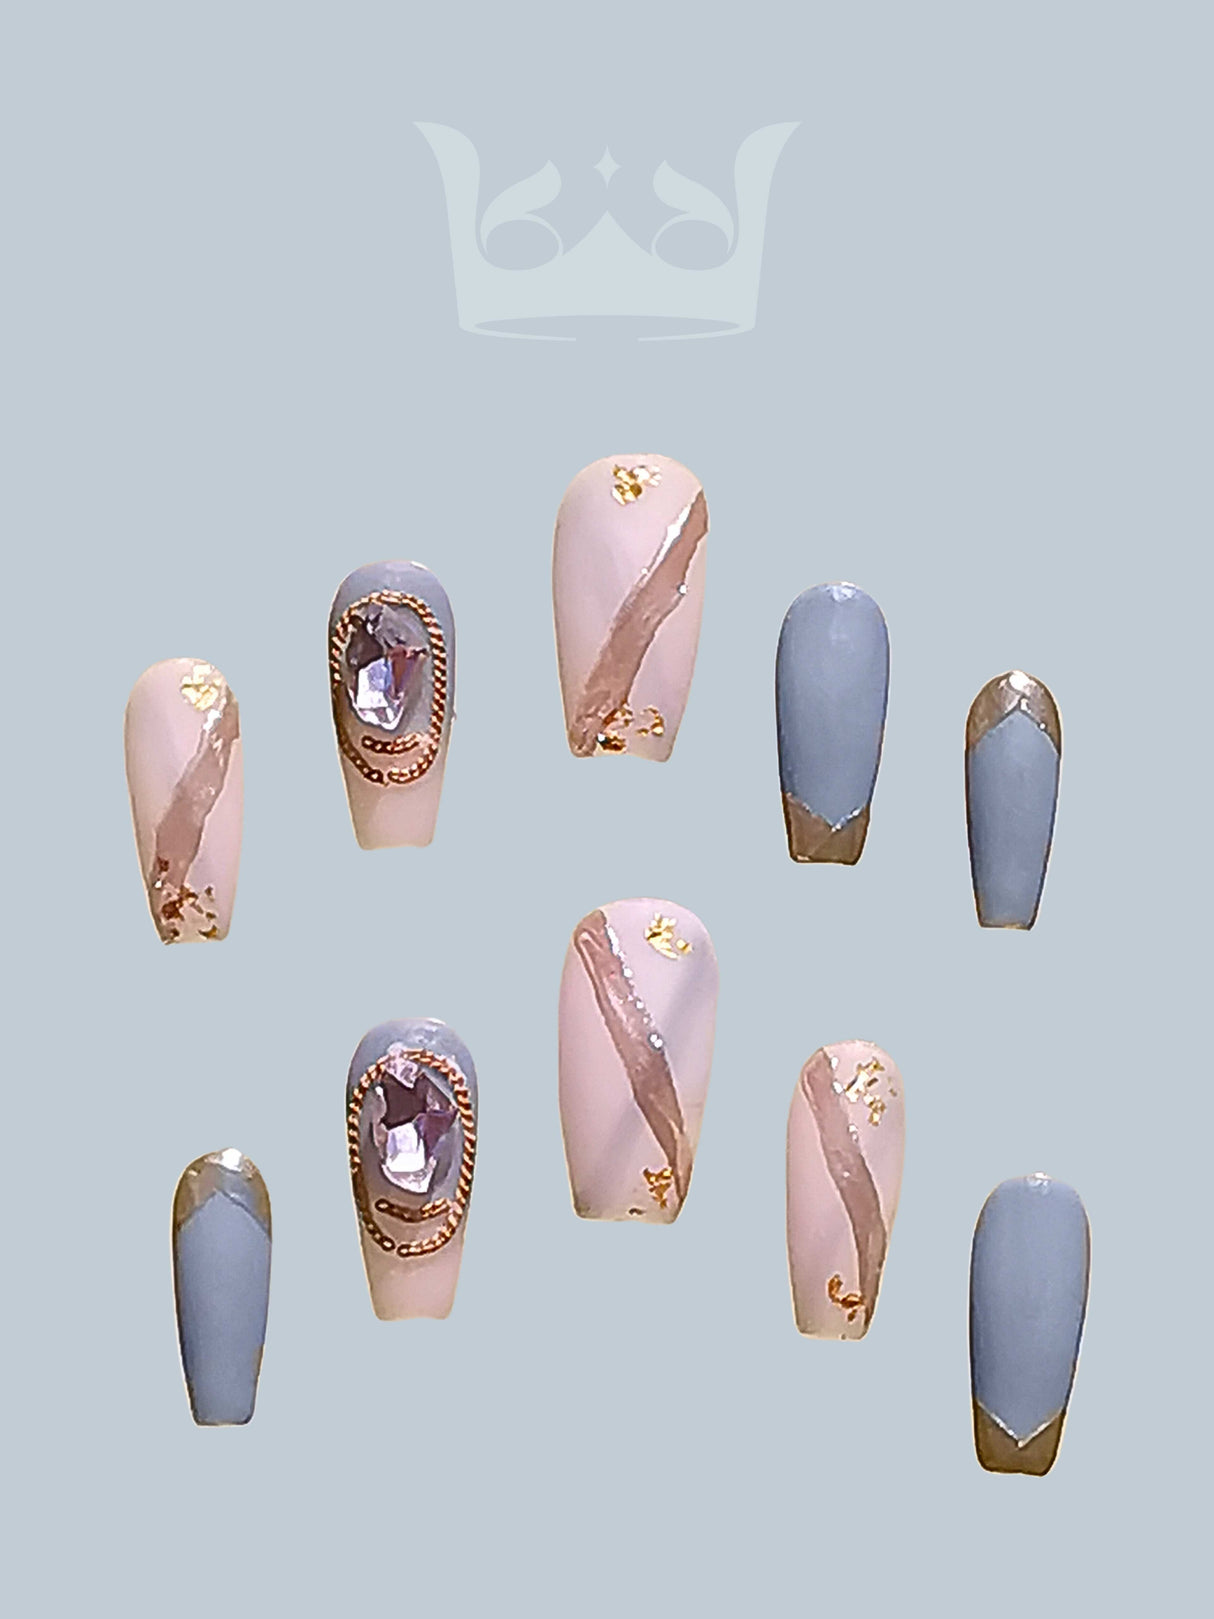 Luxurious and elegant nails with metallic gold foil accents and gemstone embellishments for special occasions or fashion statements. Coordinated and stylish.